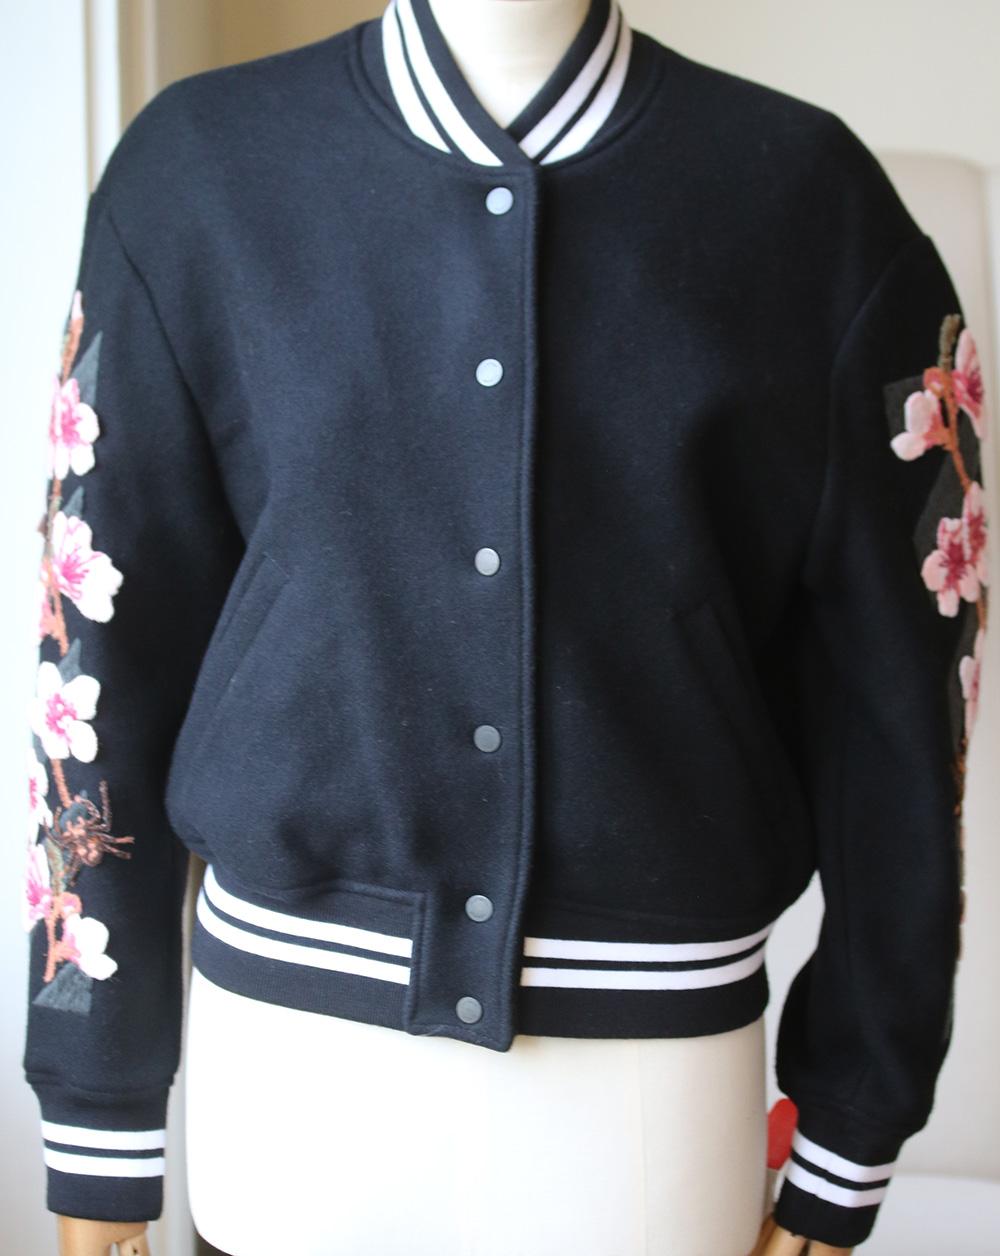 Designed in Italy, this jacket has been fabricated from a wool blend and features a mock neck, front popper button closure, long sleeves, two side pockets, black and white striped edges and a multi-coloured floral and logo embroidery at the back.